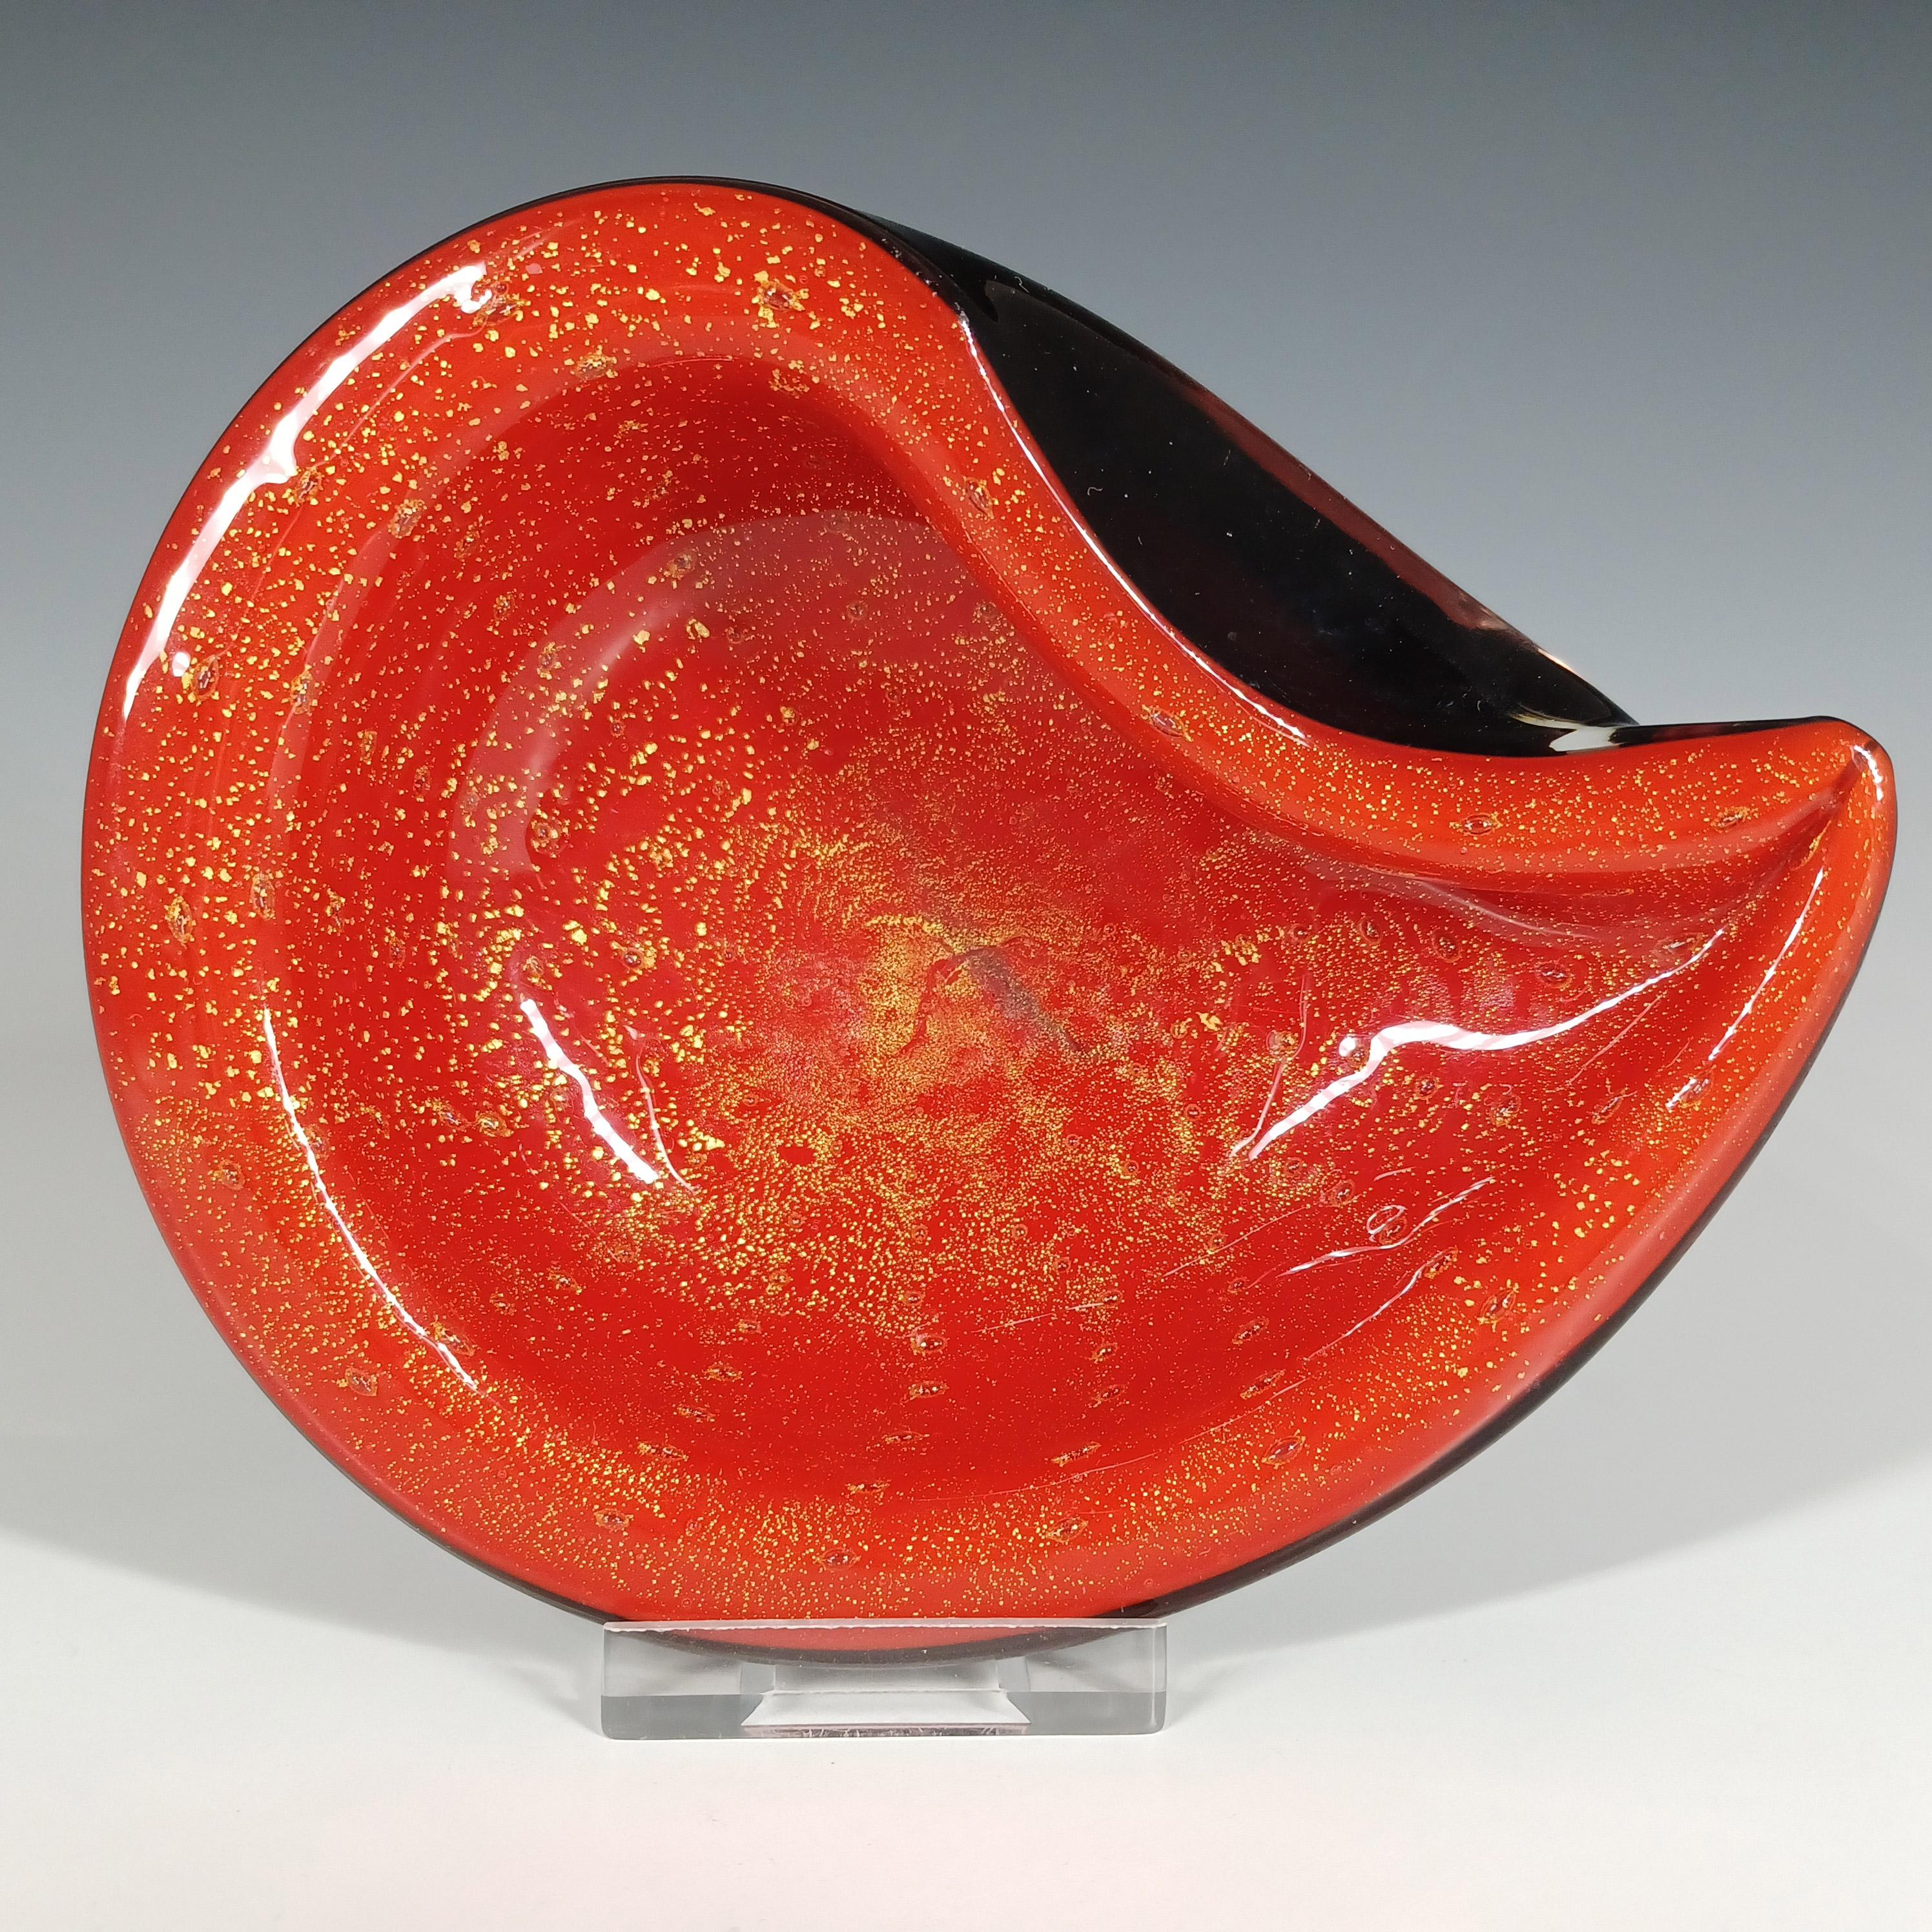 This is a magnificent 1950/60's Venetian biomorphic glass bowl, made on the island of Murano, near Venice, Italy. Most likely made by Barbini. In a stunning combination of opaque red glass cased in black glass, with a wonderful controlled bubble